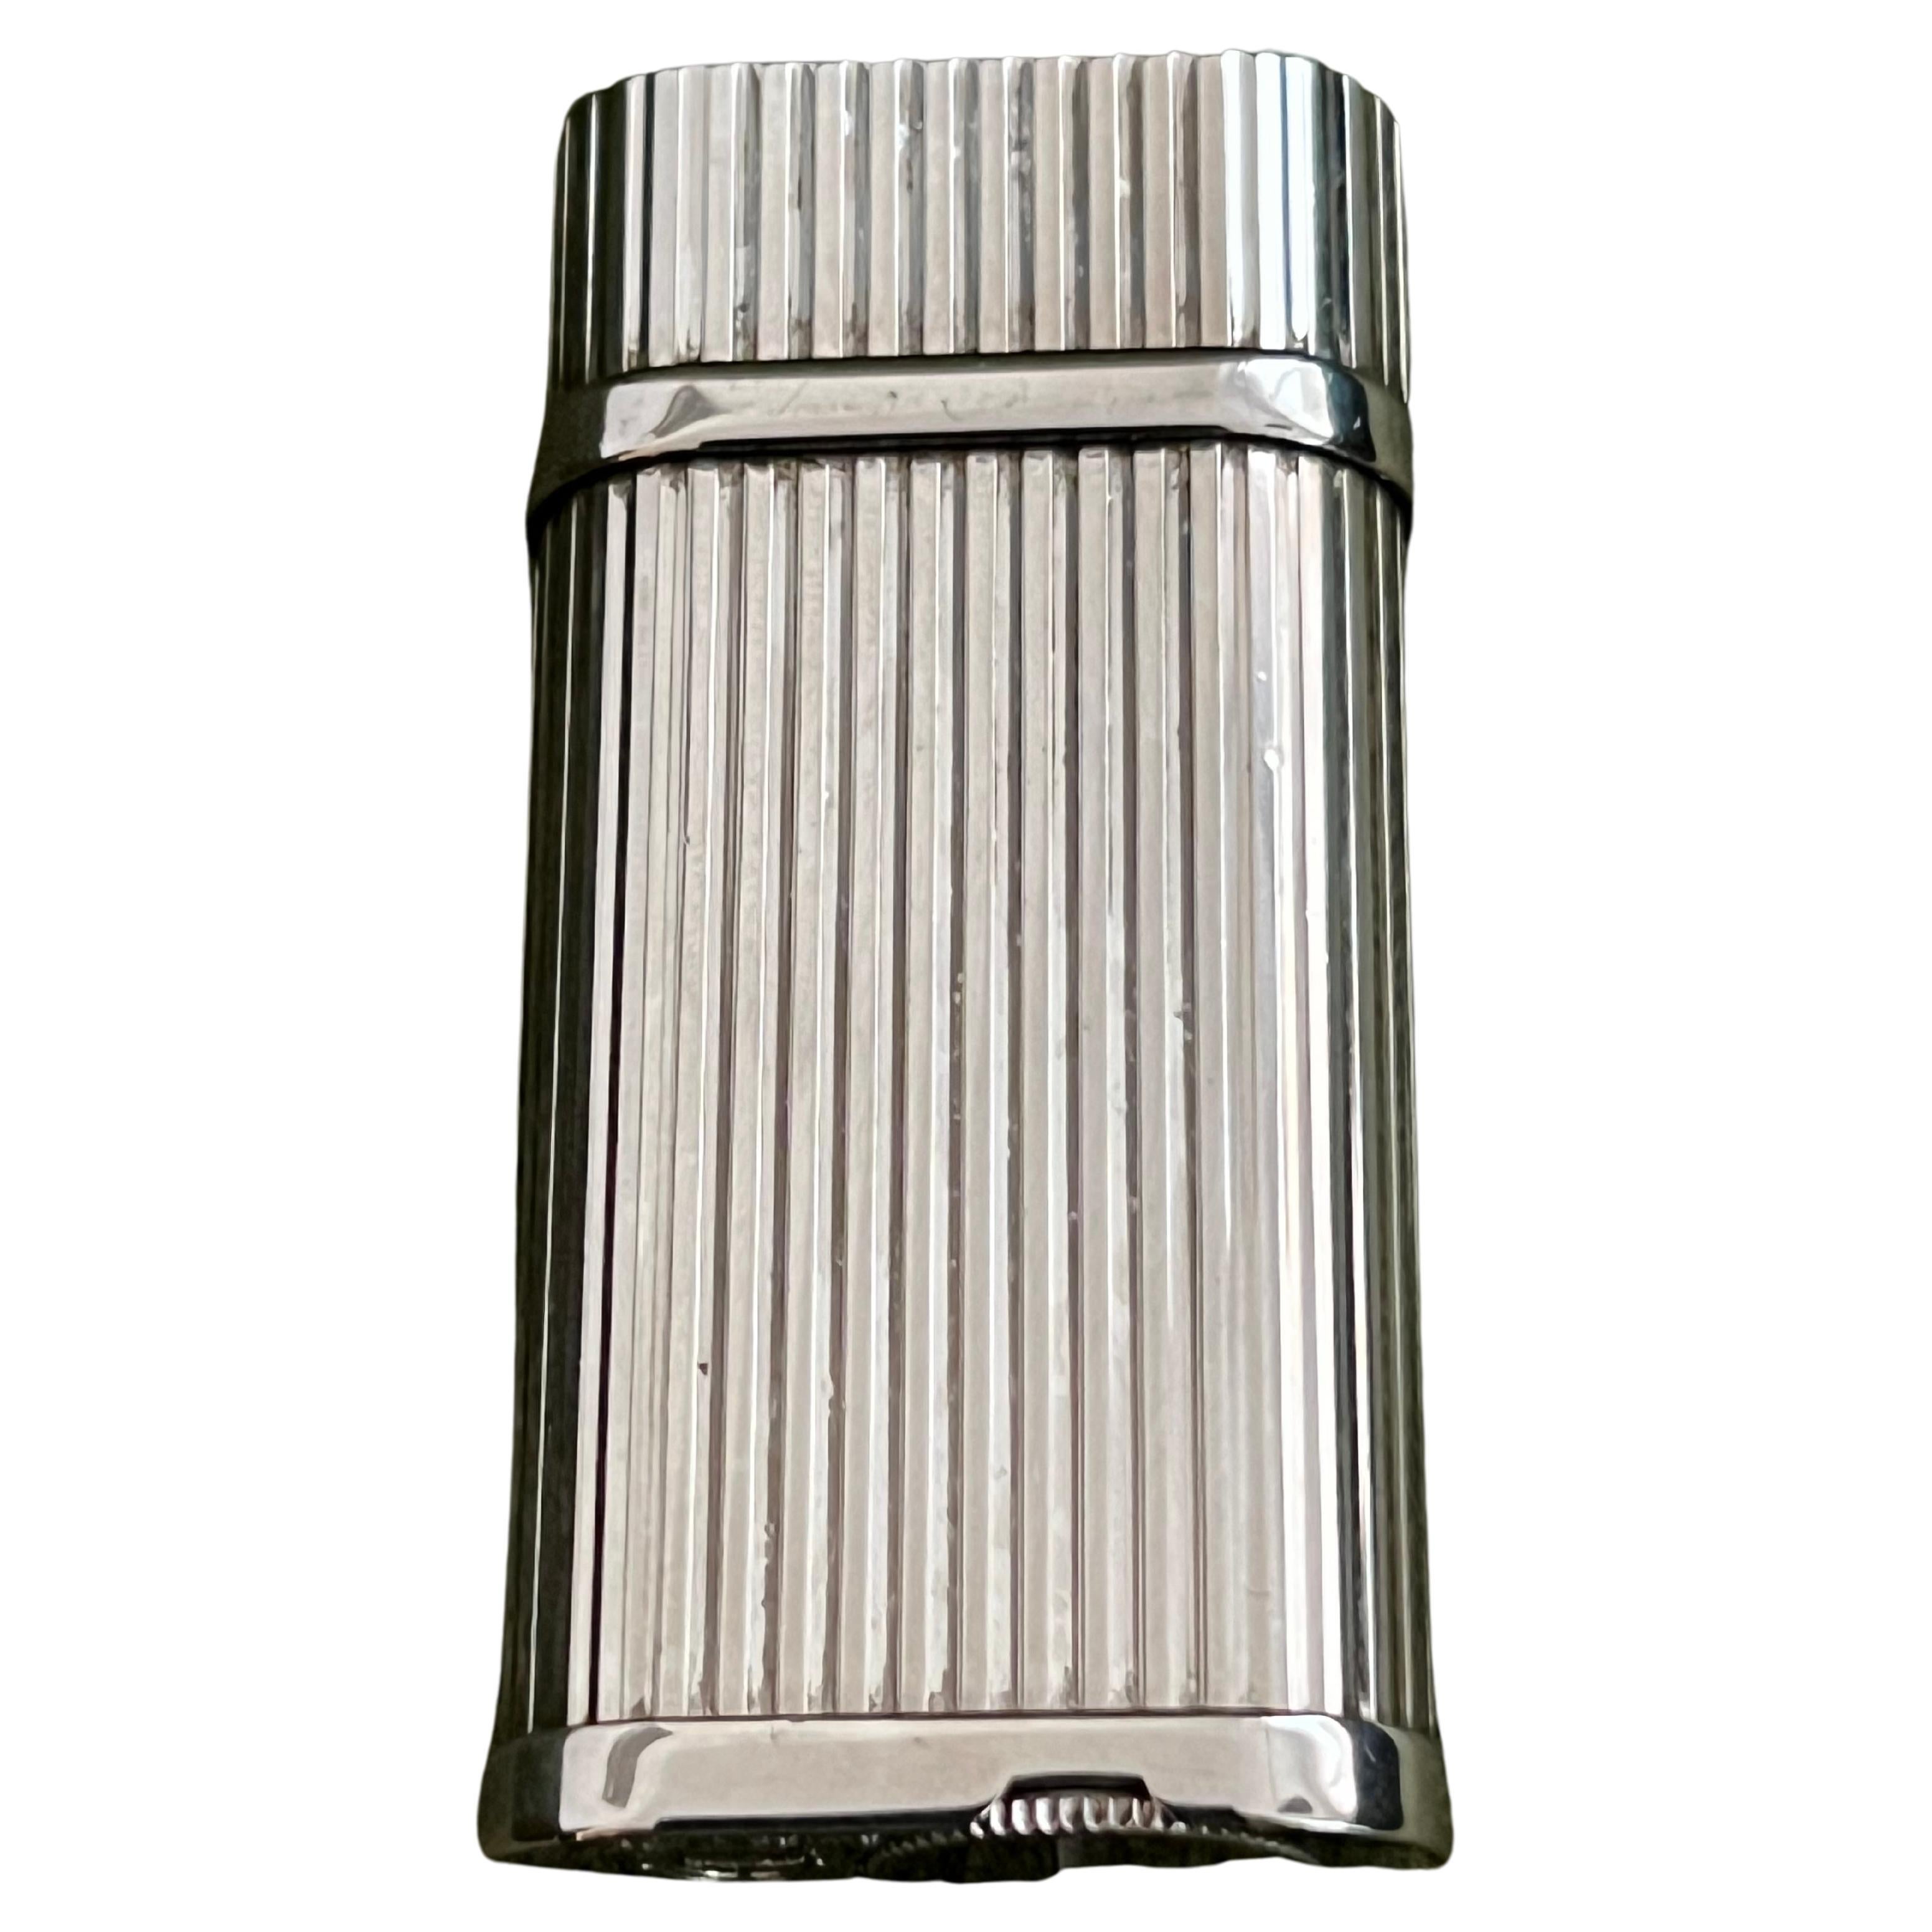 Le Must De Cartier Vintage and Retro Mini lighter 
A “Les Must De Cartier Paris” Platinum Finish Silver lighter
Retro, elegant and chic 
In mint working condition, sparks, ignites and flame. 
Perfect gift
This item is Pre-owned.
Cartier Paris 
In